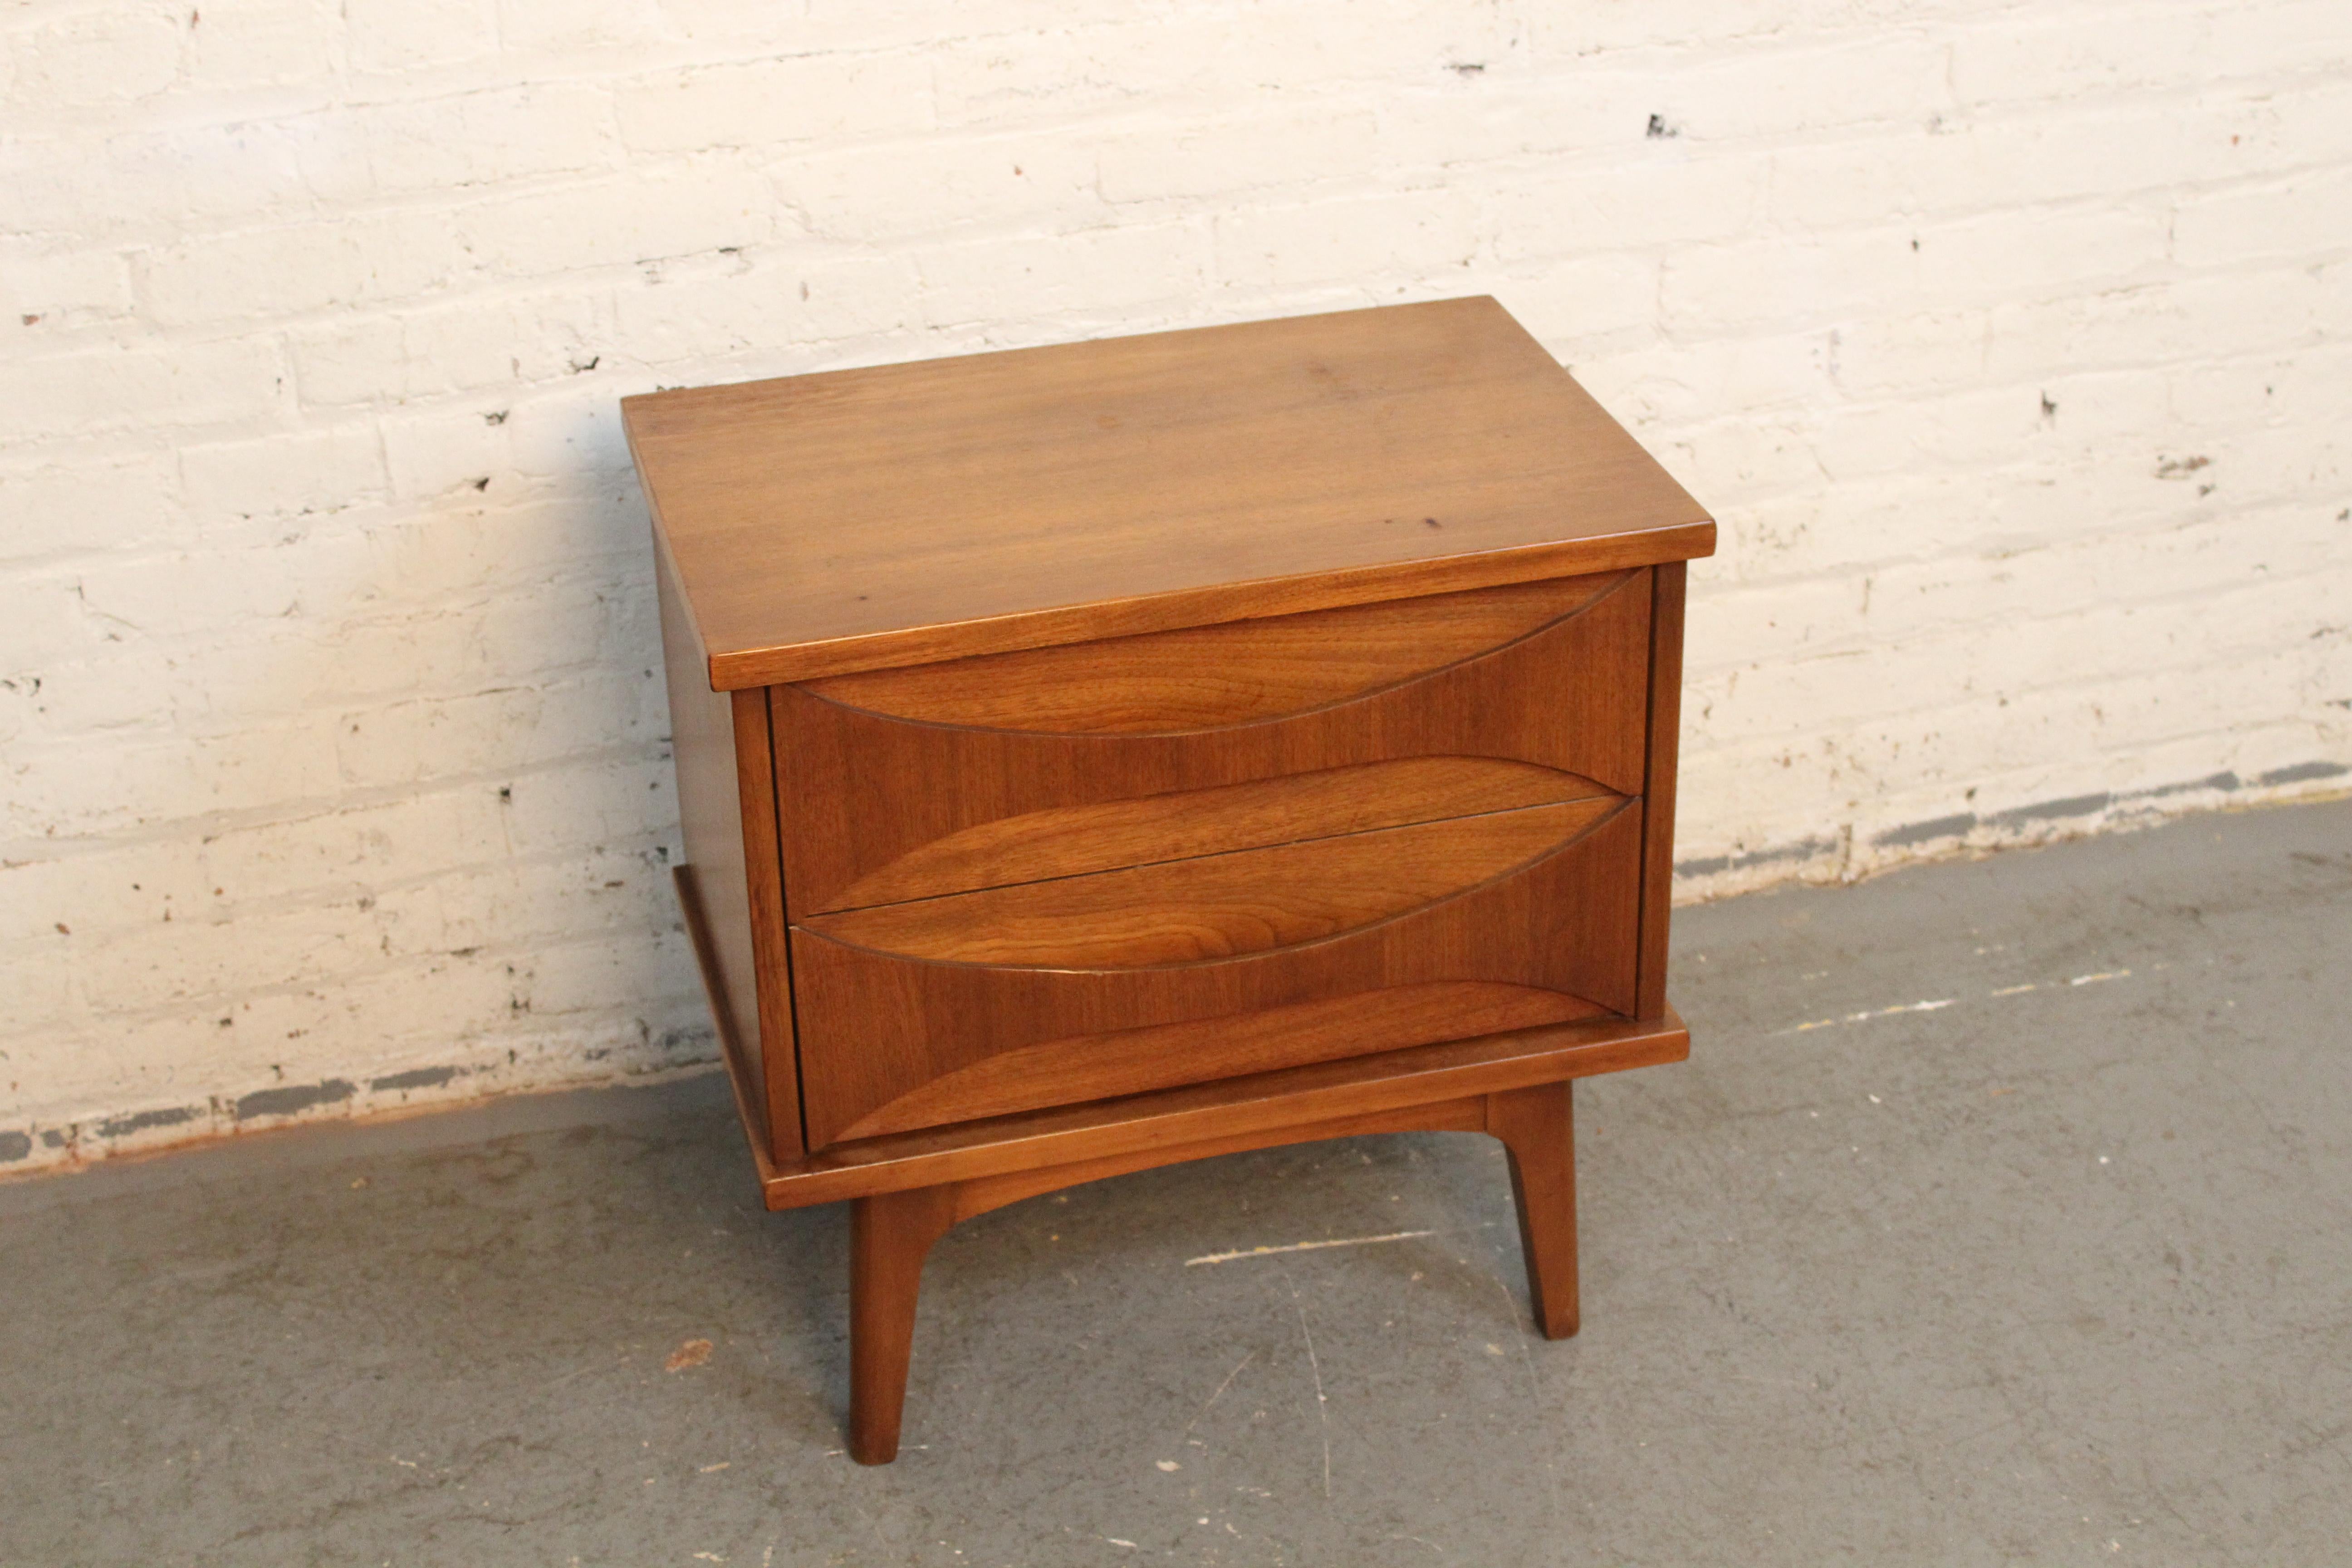 Add a touch of class to your bedside with this vintage bowtie-styled nightstand! Designed and built by United Furniture Corporation of Ronda, North Carolina it features timeless American construction paired with a charming vintage modern style. The